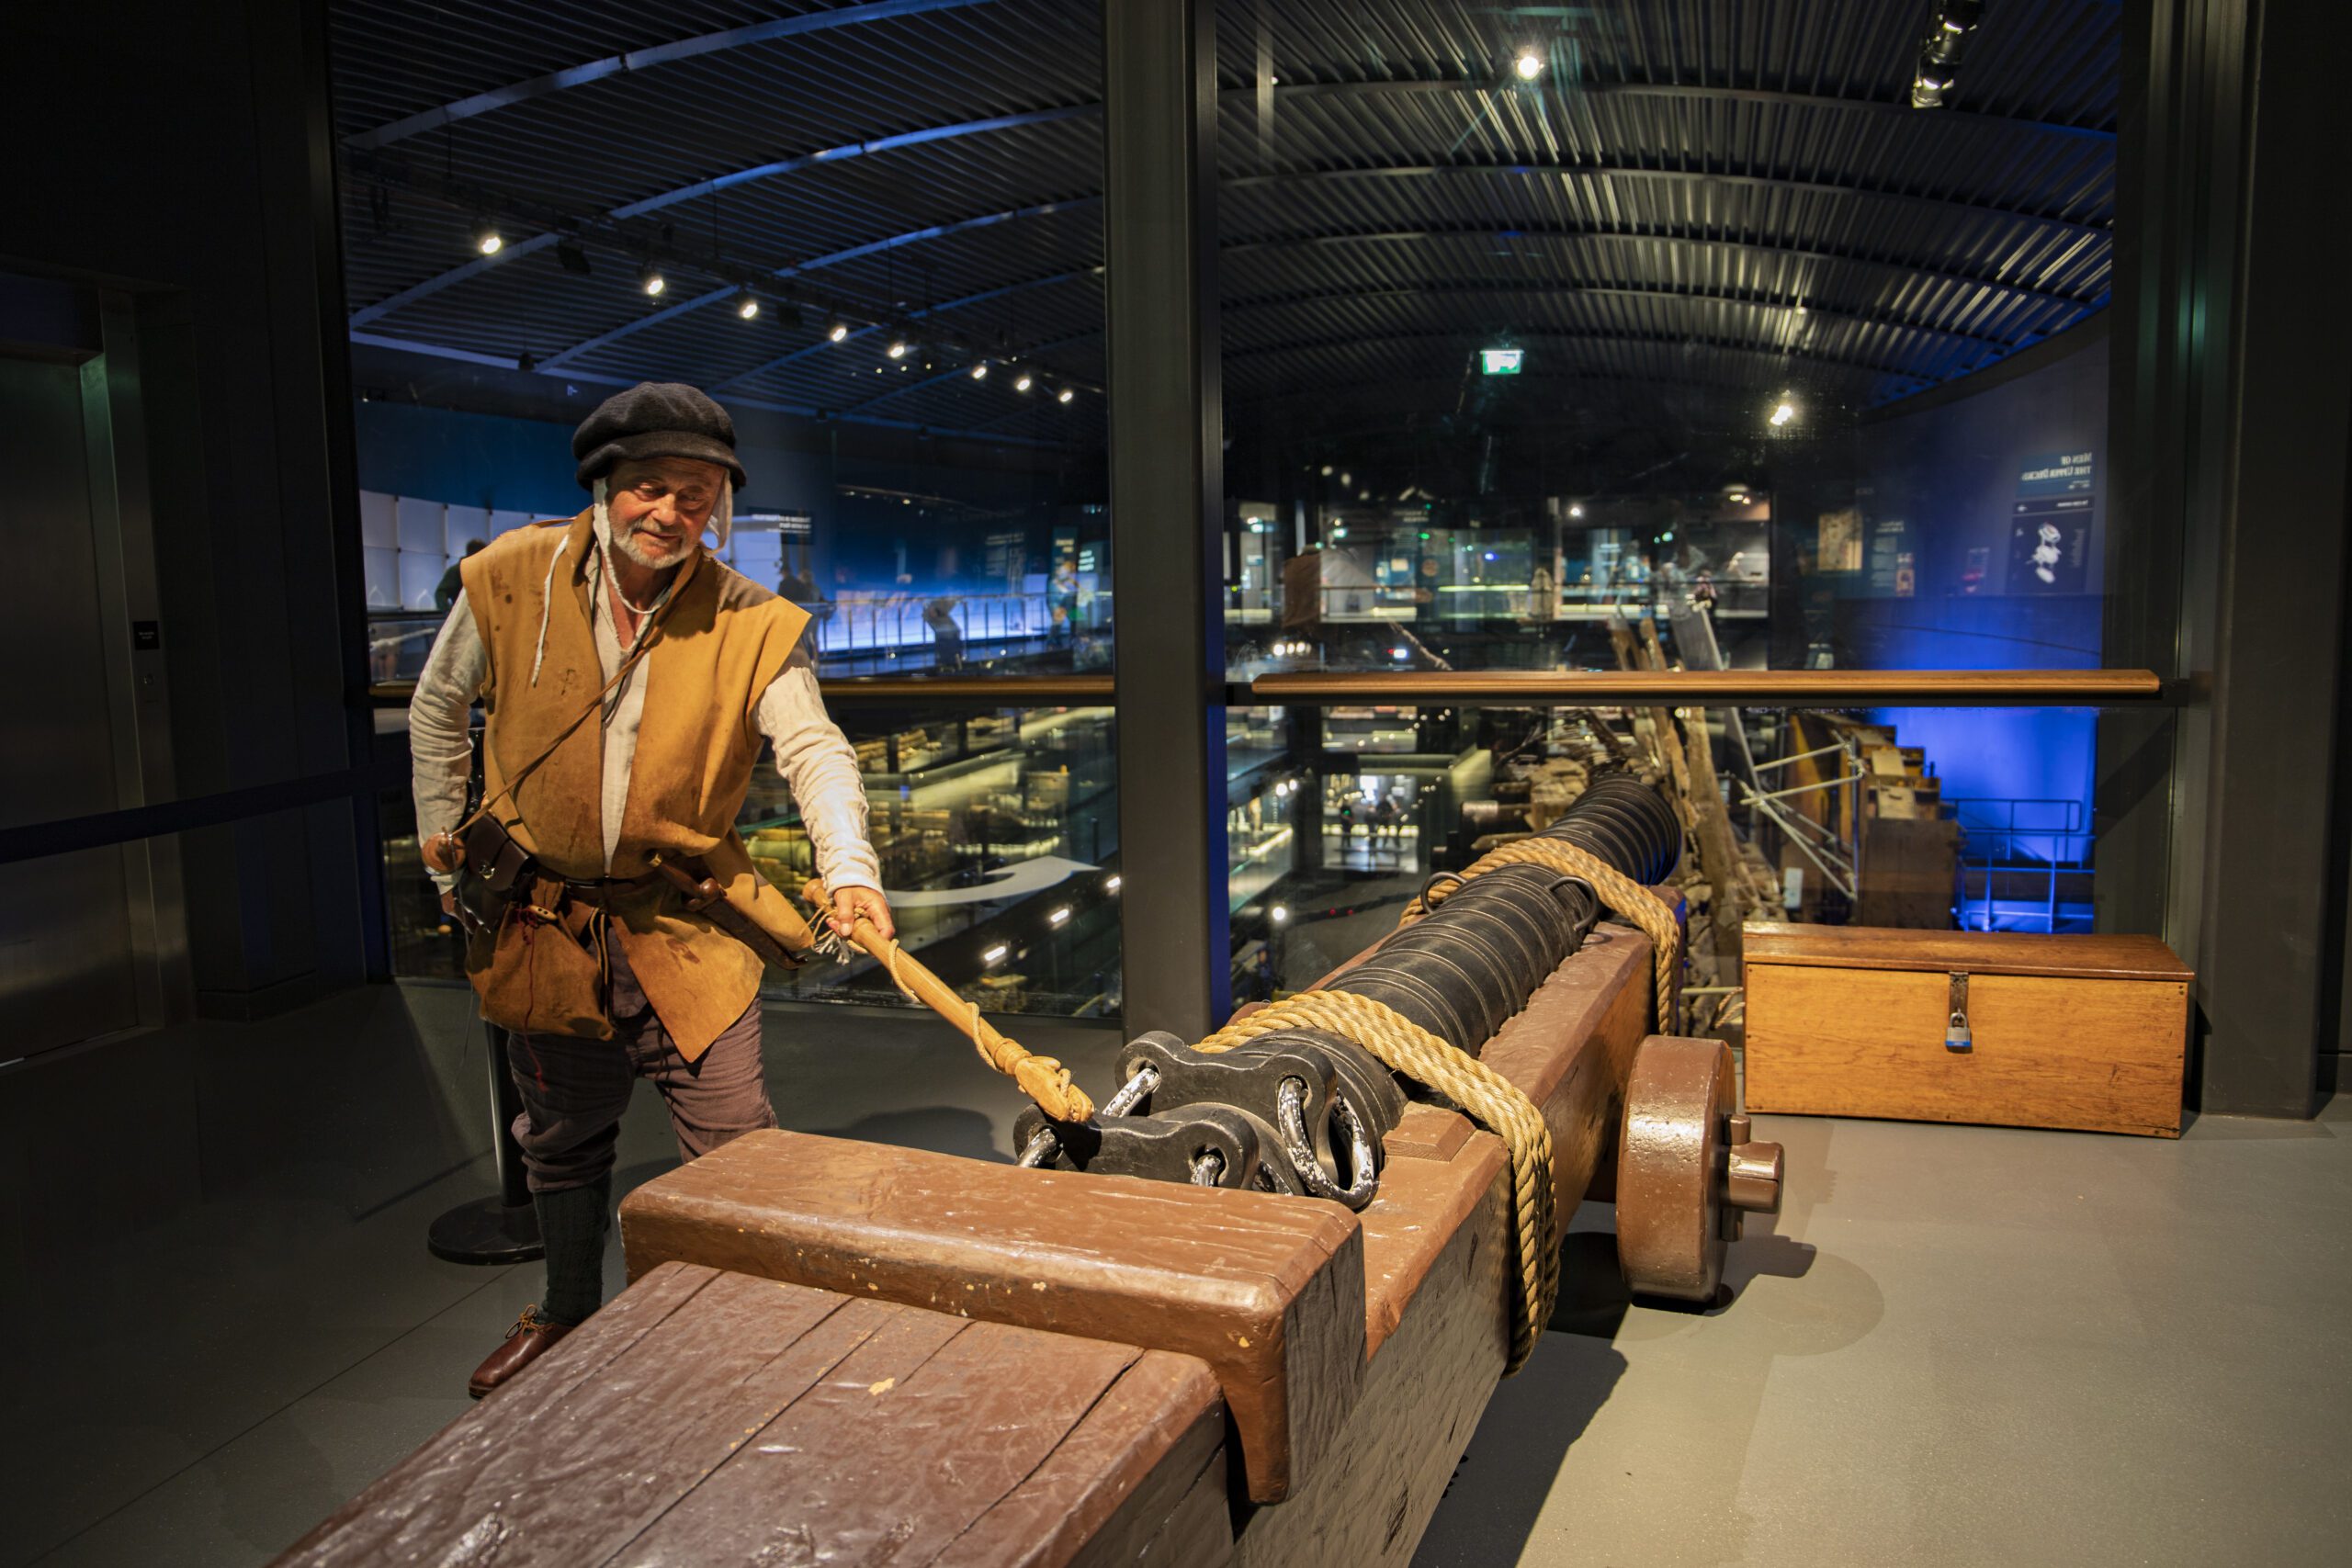 Man dressed as a Tudor pretends to fire a cannon inside the Mary Rose Museum